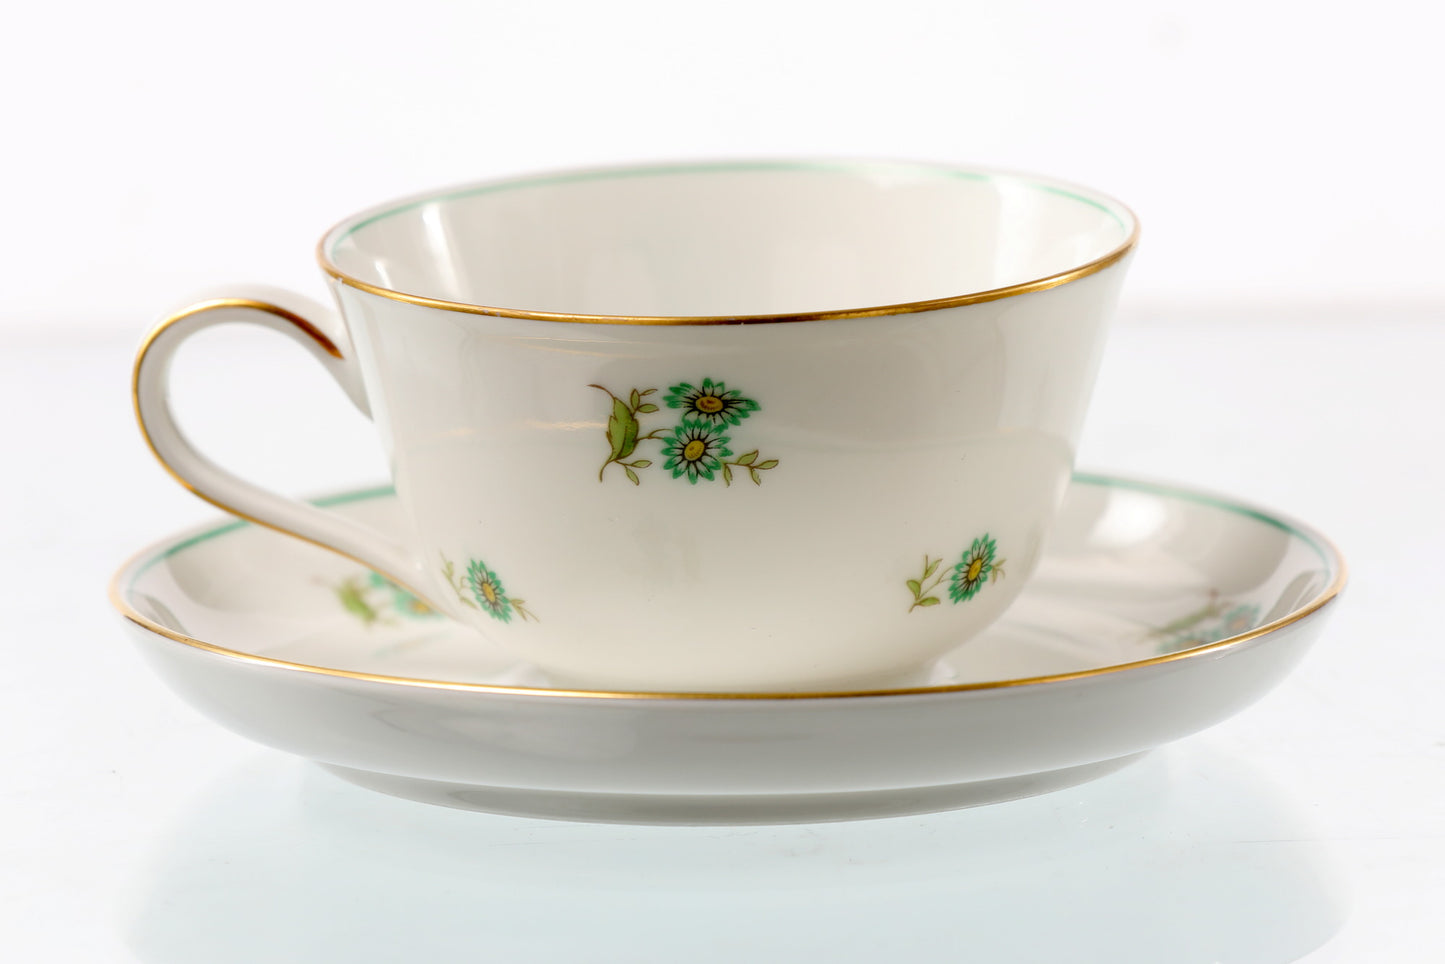 Rosenthal Helena coffee service from the 50s